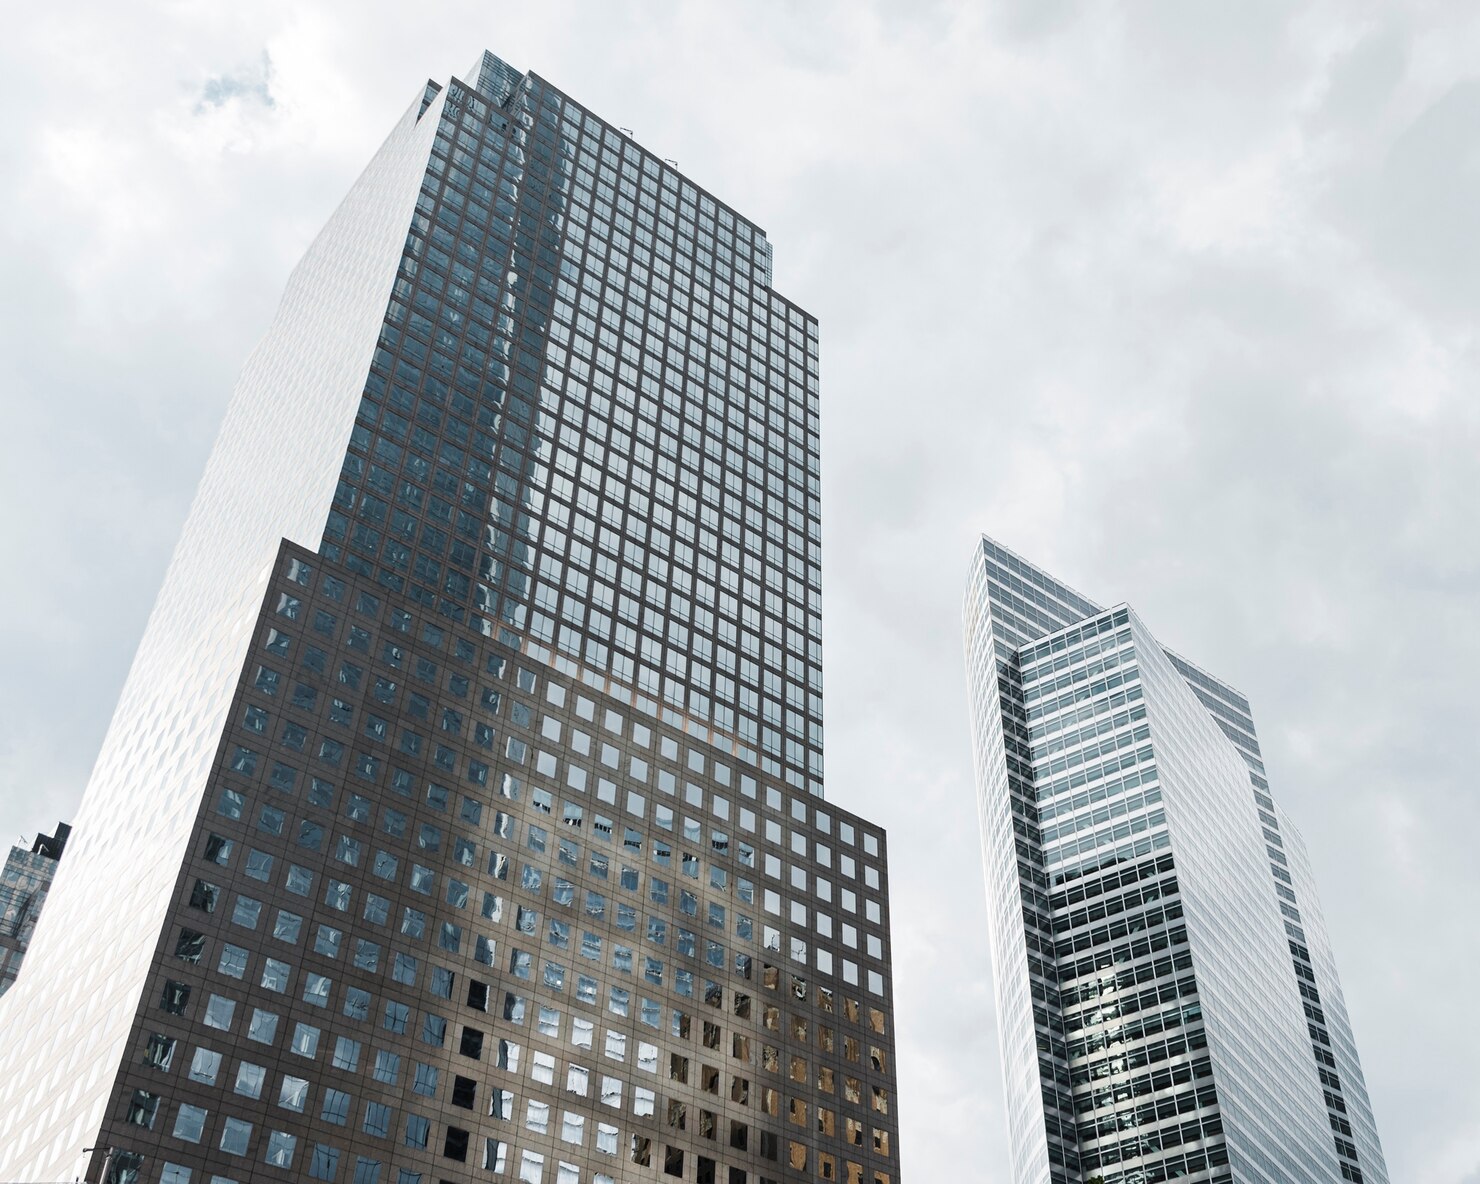 low-angle-tall-buildings-with-grey-clouds_23-2148230381.jpg__PID:703c90ba-a1fb-429b-8979-3d5c878c8c05